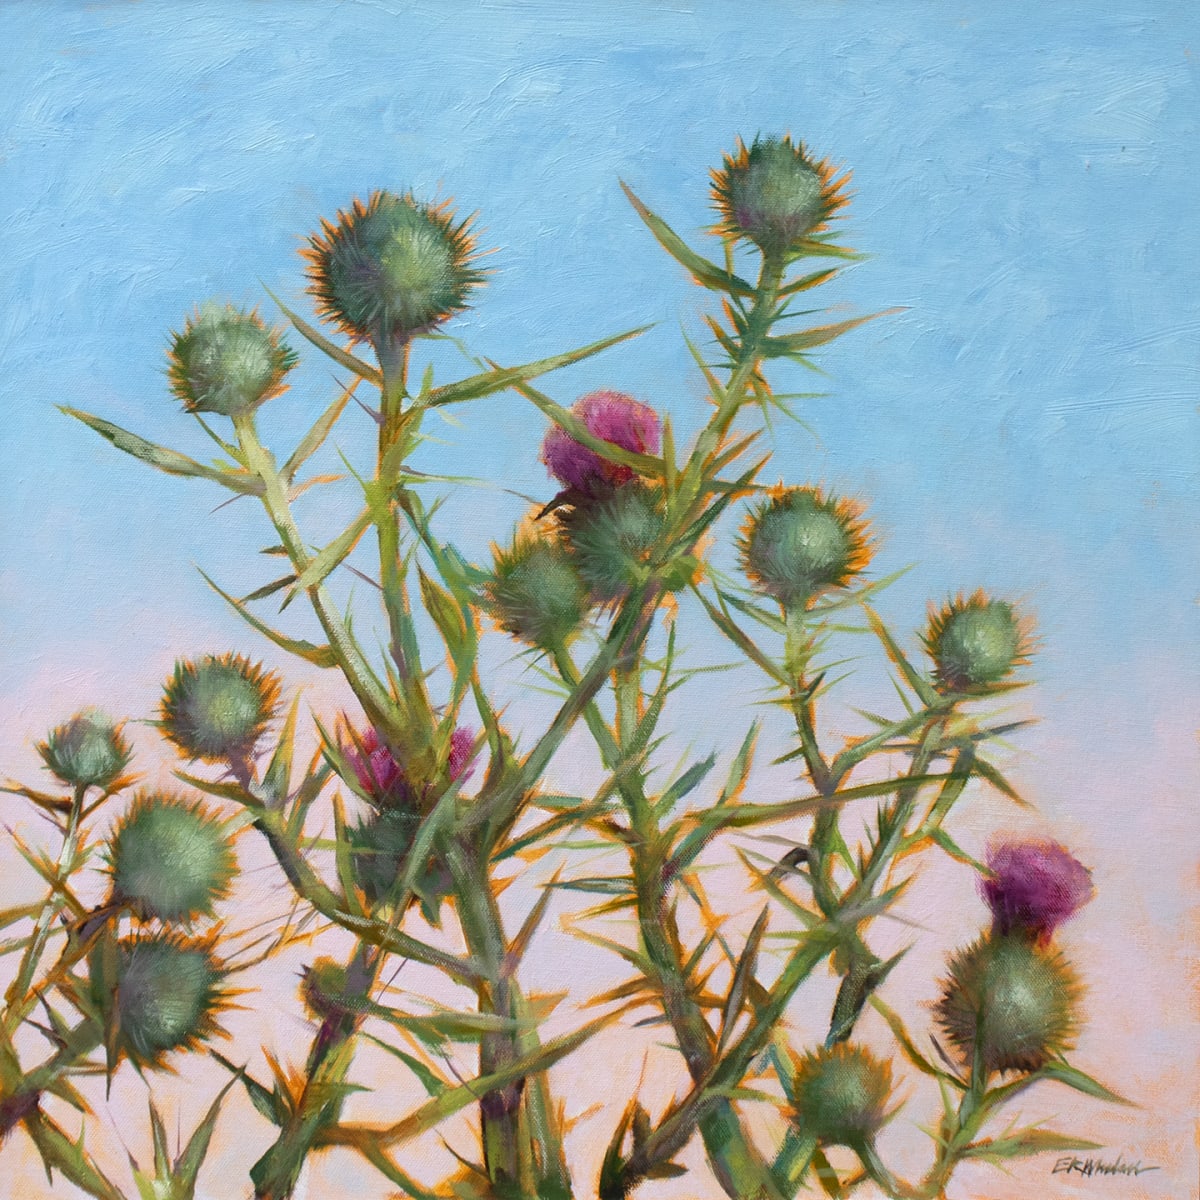 Merry Thistles by Elizabeth R. Whelan  Image: A dancing crowd of thistles against a cool fall sky makes for a cheerful botanical landscape painting.